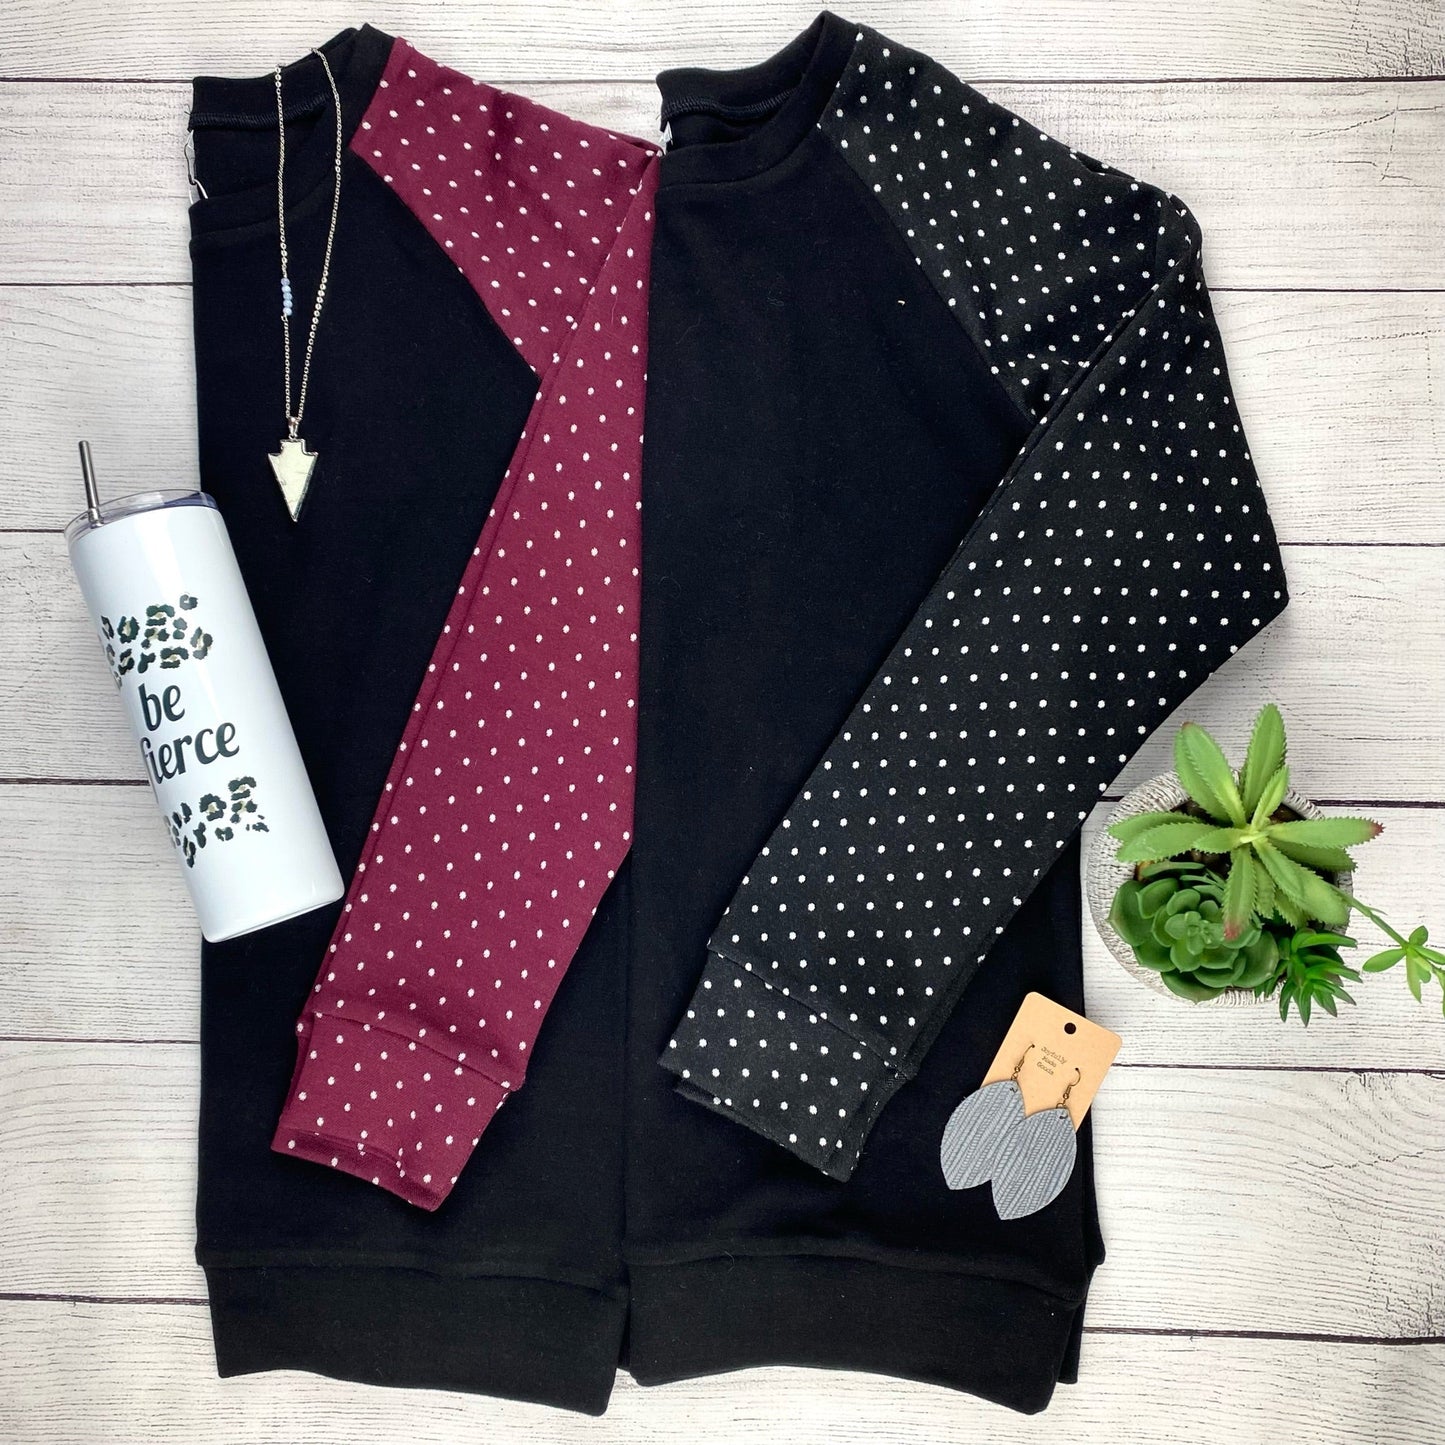 Accent Sleeve Pullover- Burgundy Dot